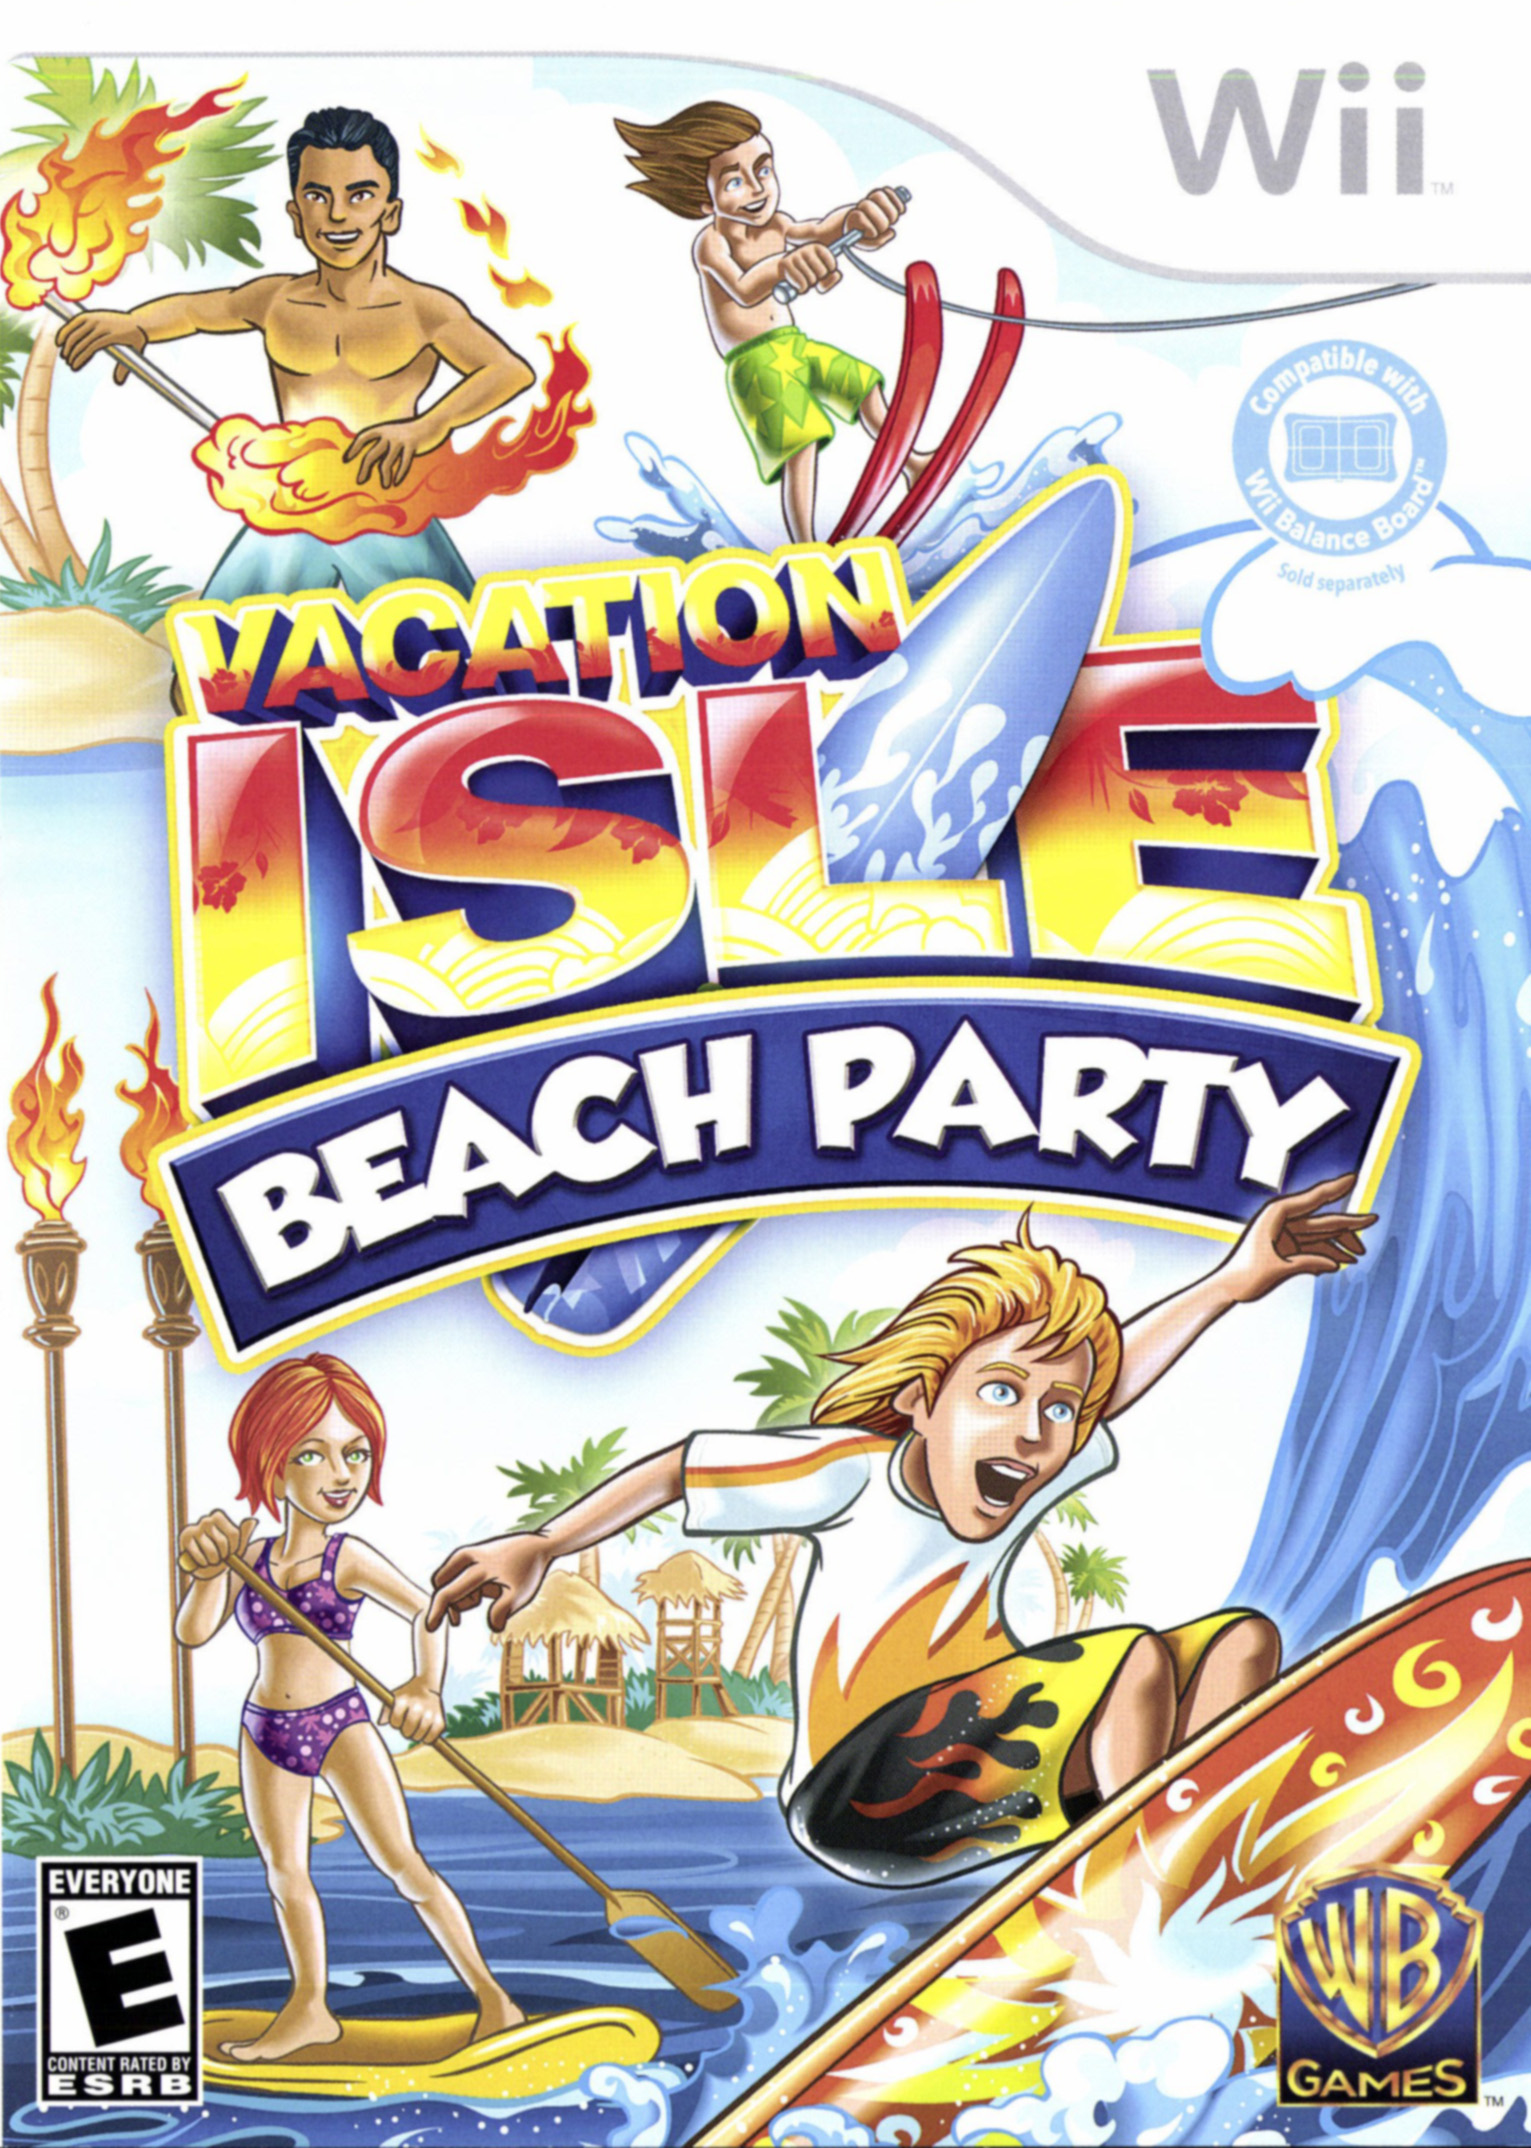 Used Vacation Isle: Beach Party - Nintendo Wii (Used) - image 1 of 2